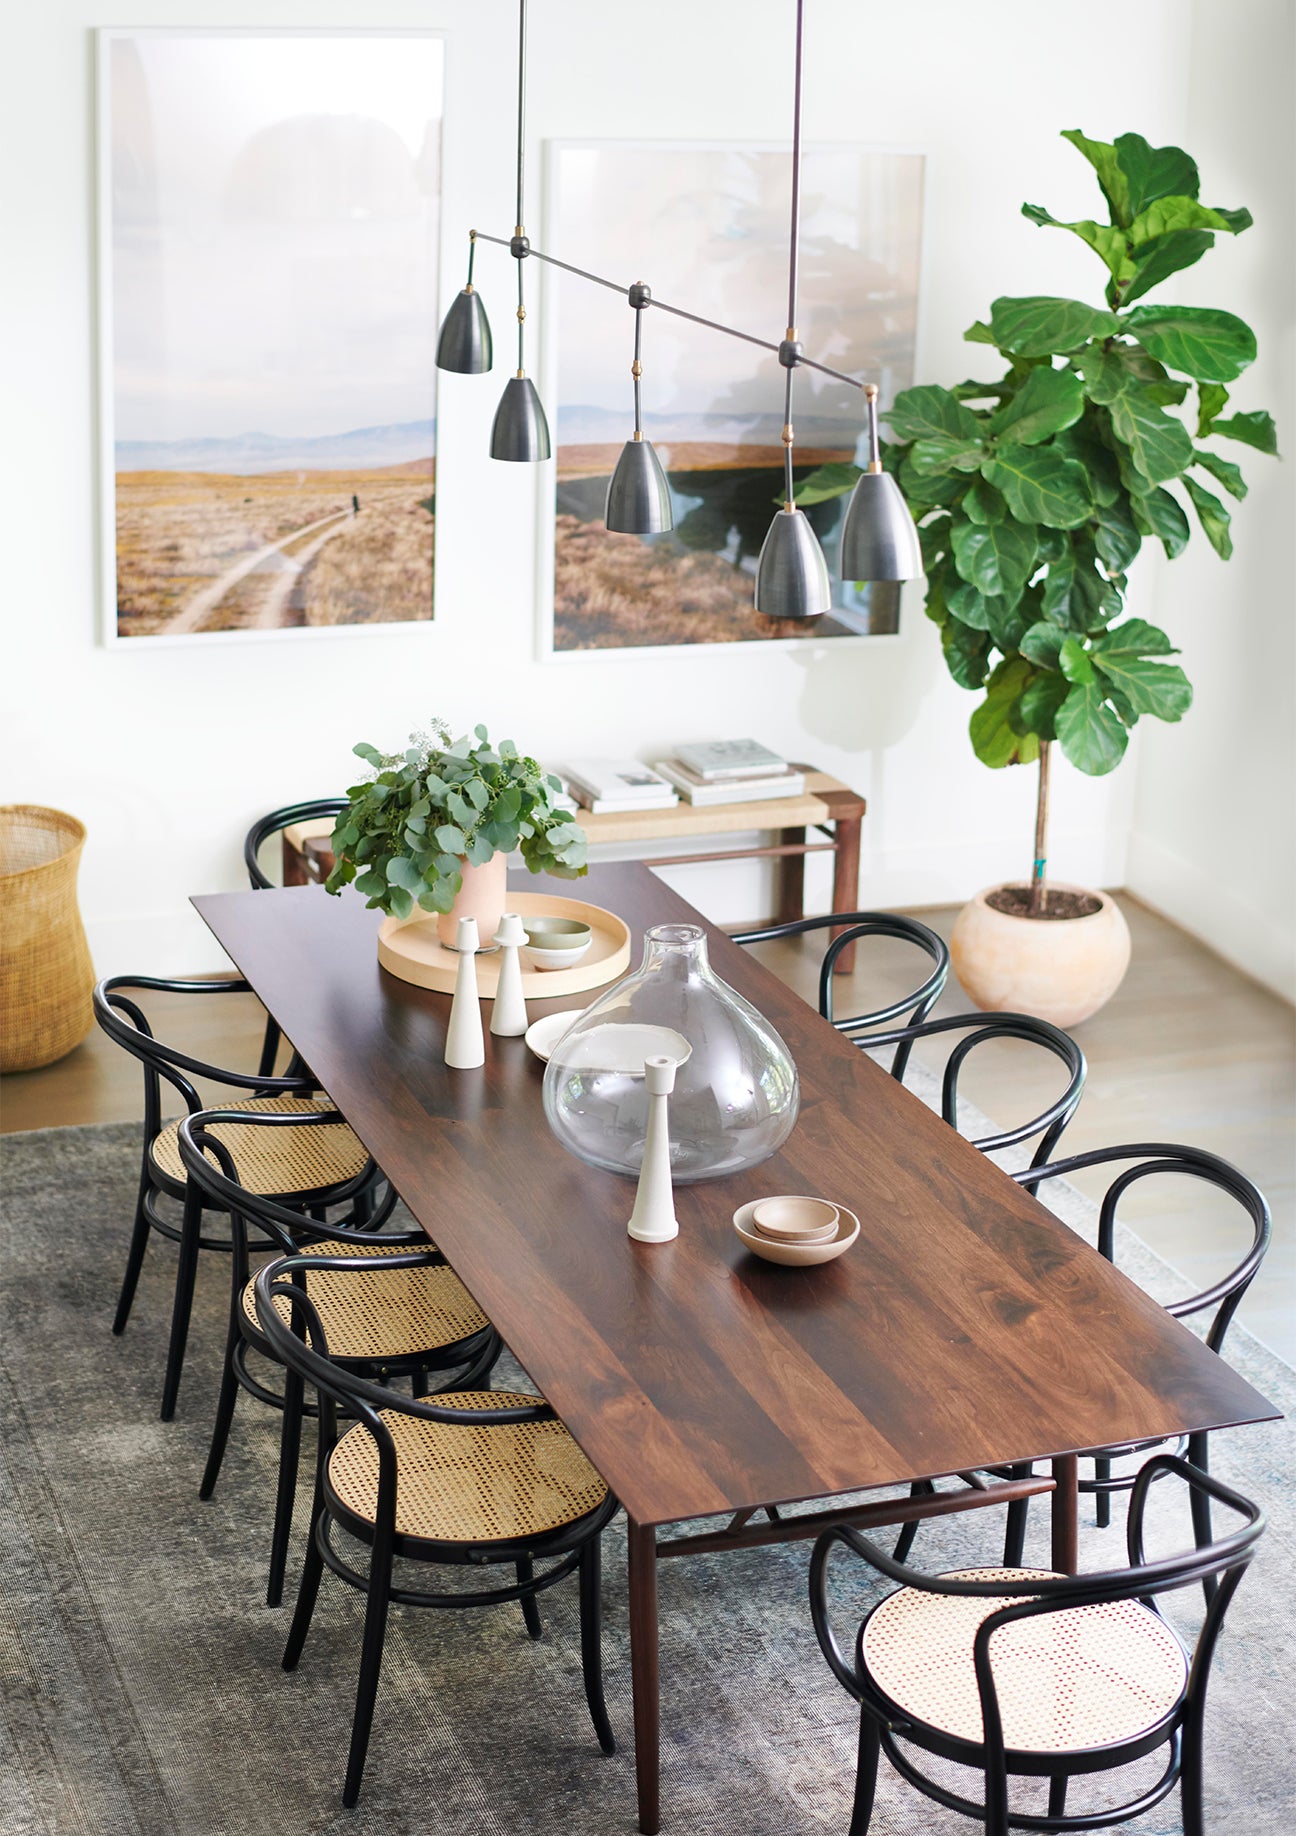 birds eye shot of 8 person dining table with cane chairs